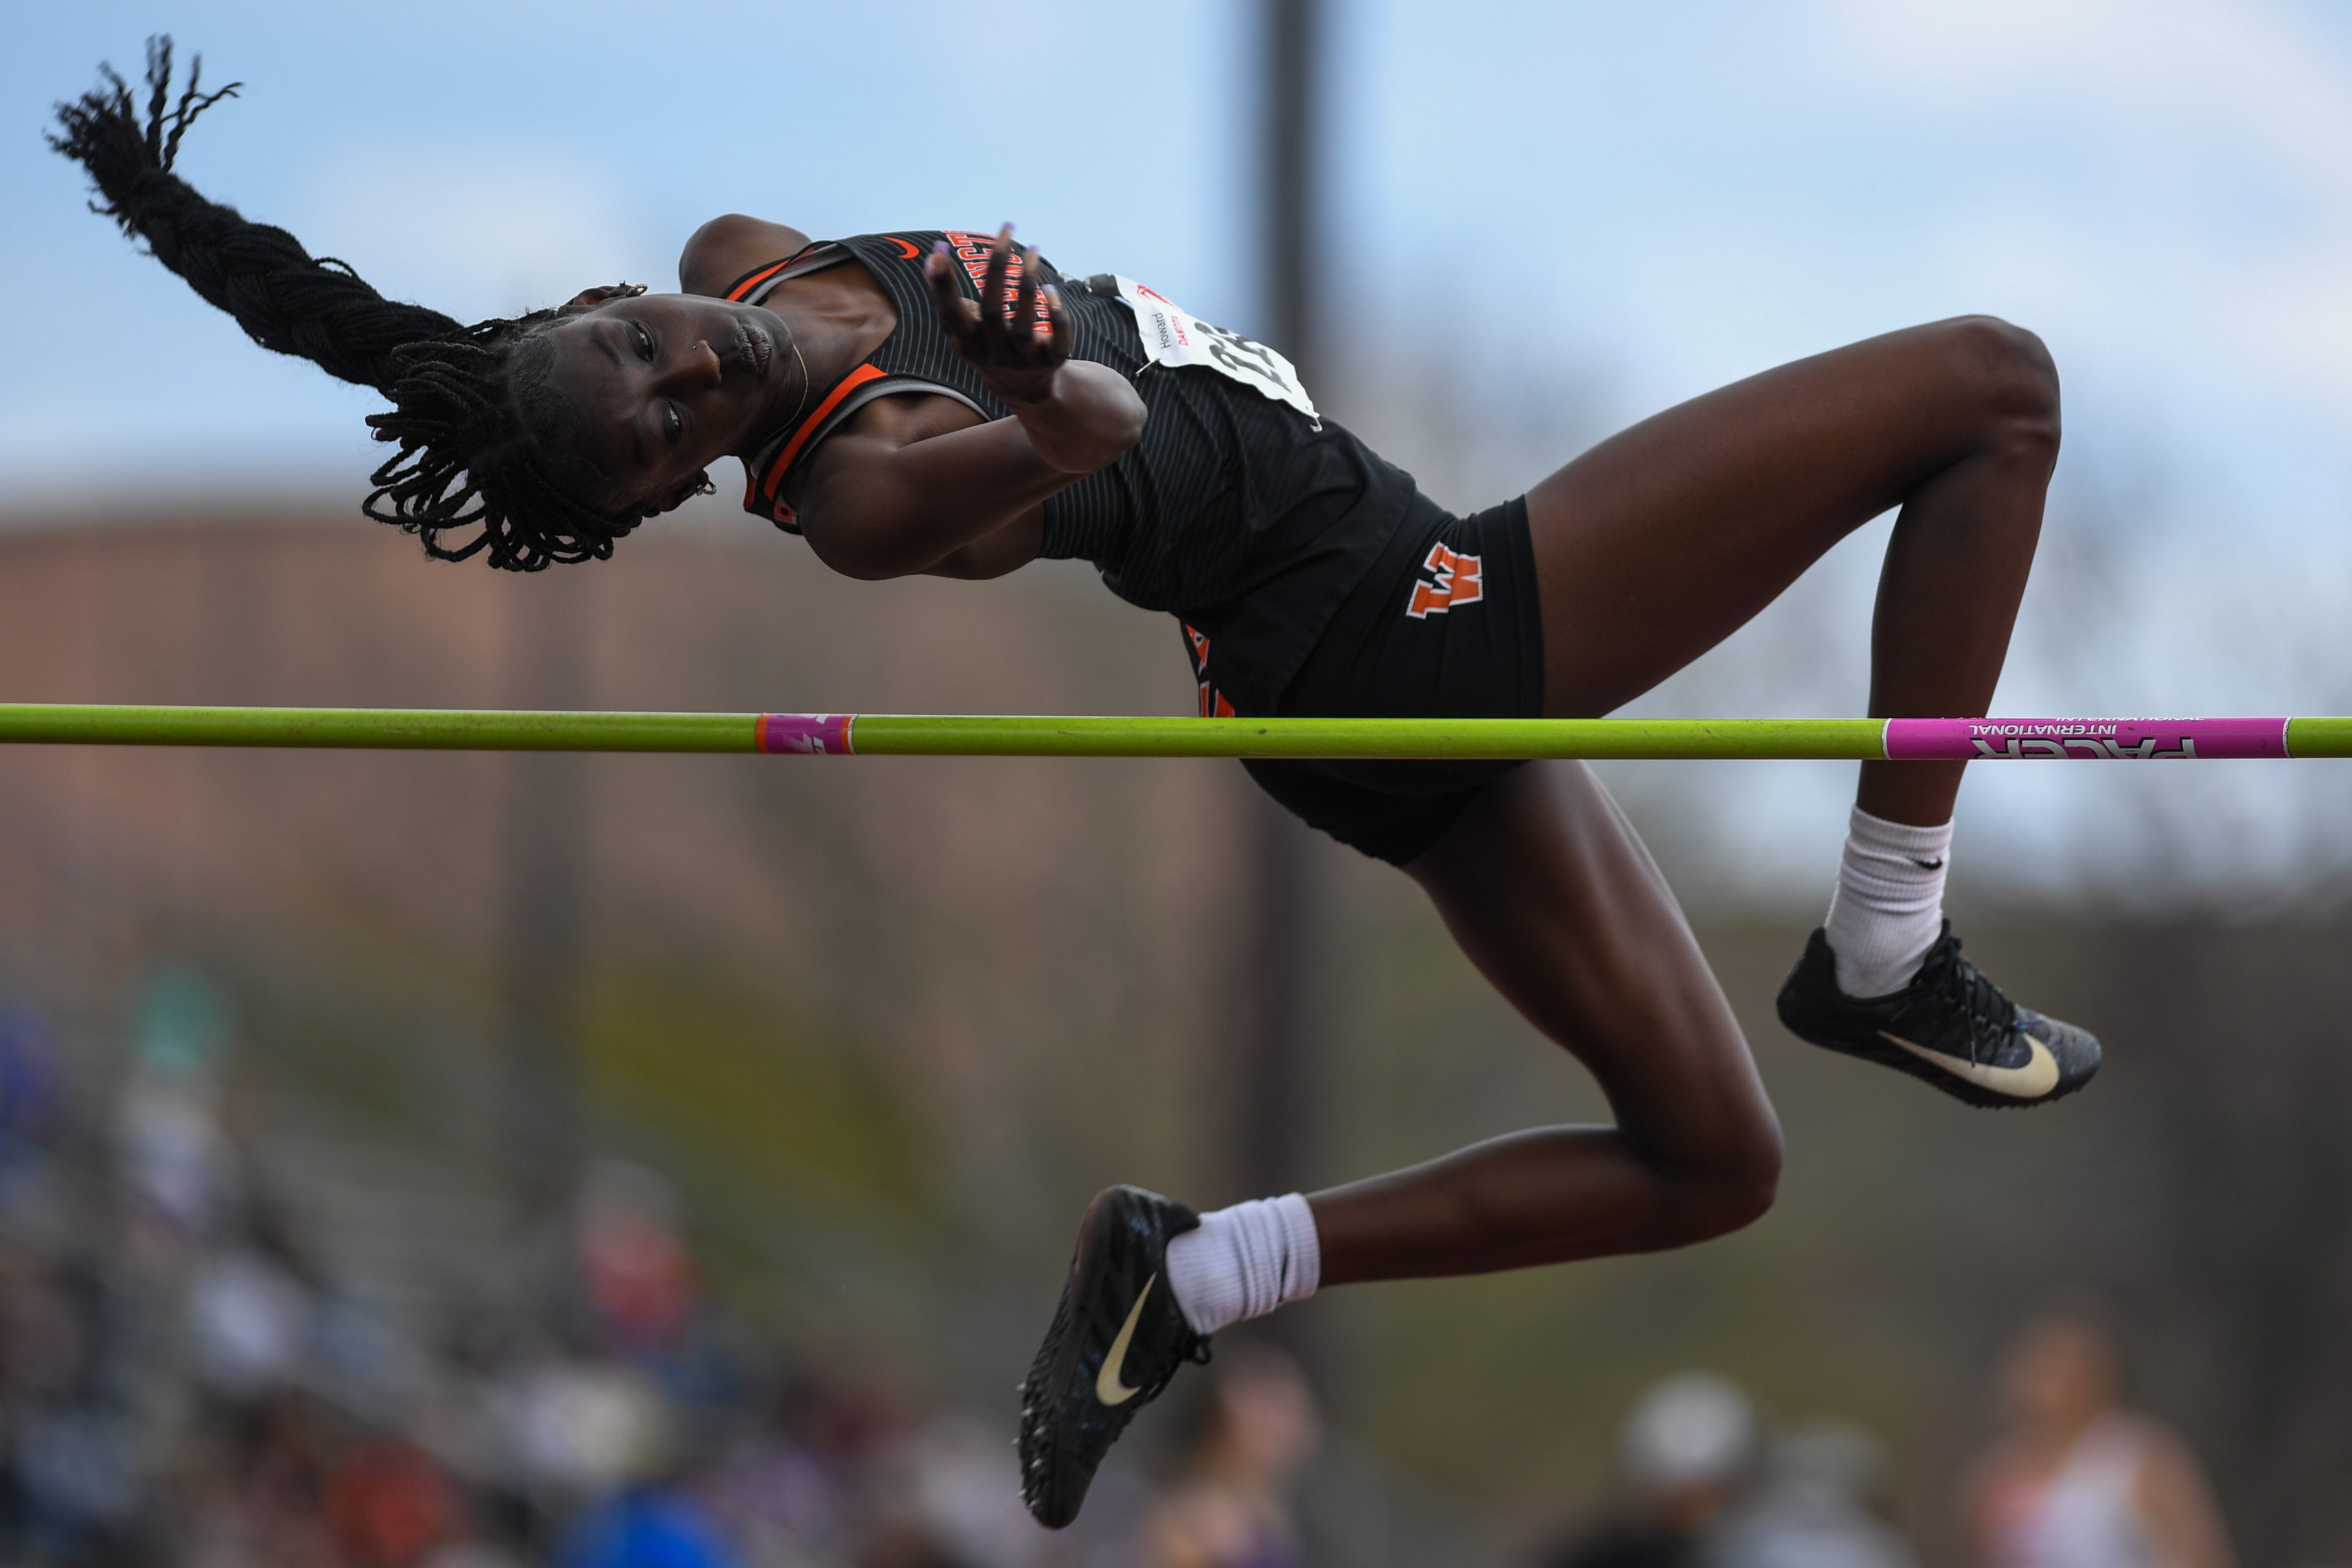 Howard Wood Dakota Relays: Highlights and results from a thrilling day one